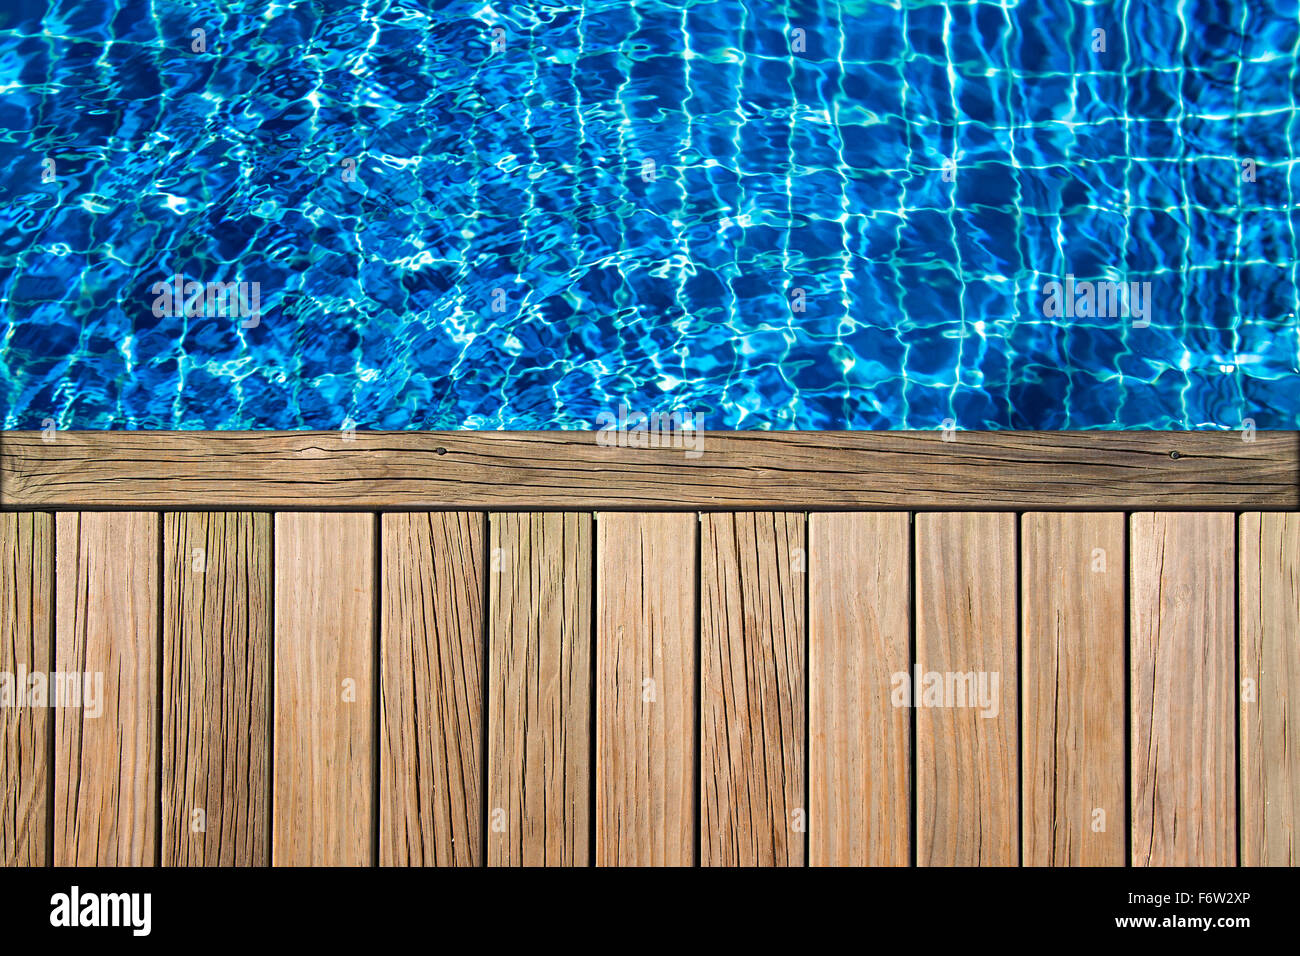 wooden planks above swimming pool surface Stock Photo